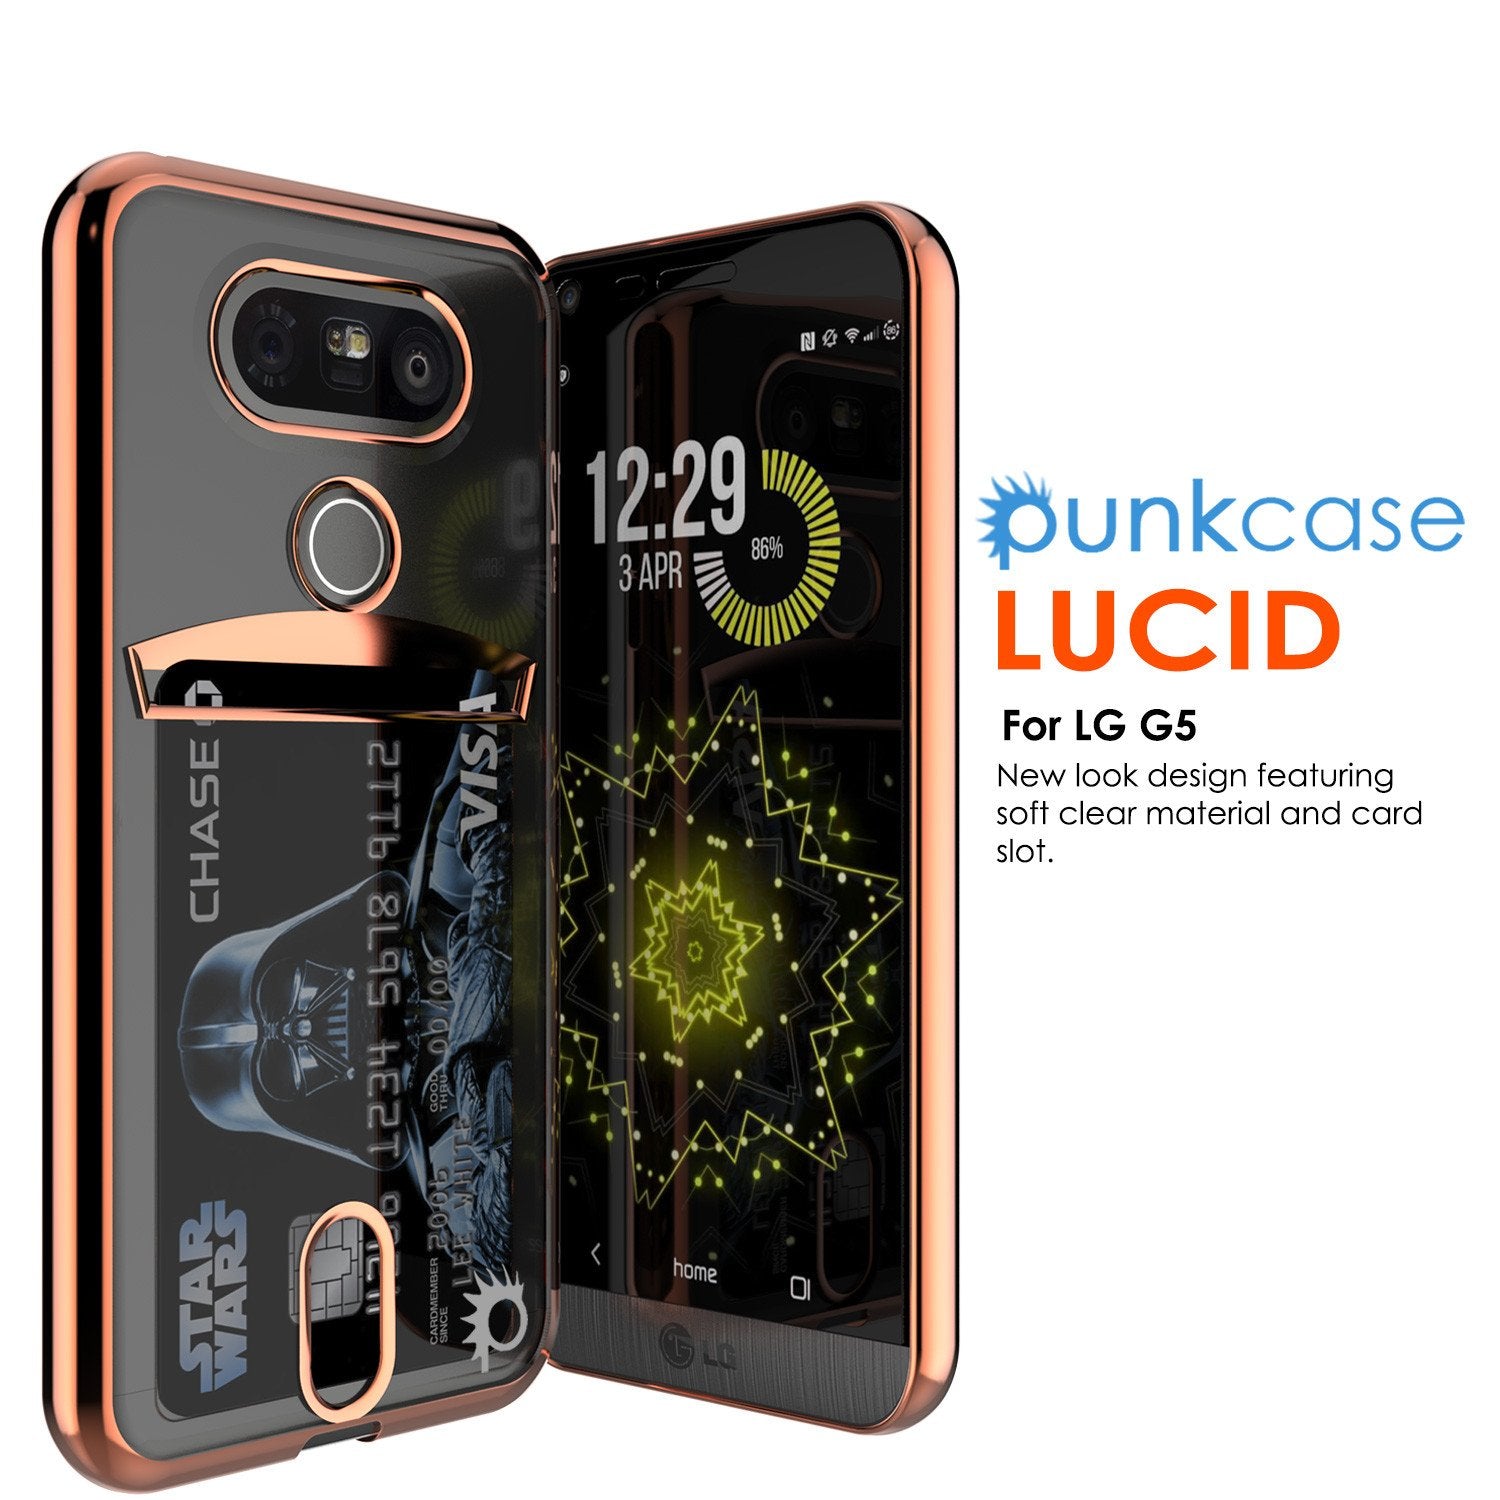 LG G5 Case, PUNKCASE® Rose Gold LUCID  Series | Card Slot | PUNK SHIELD Screen Protector